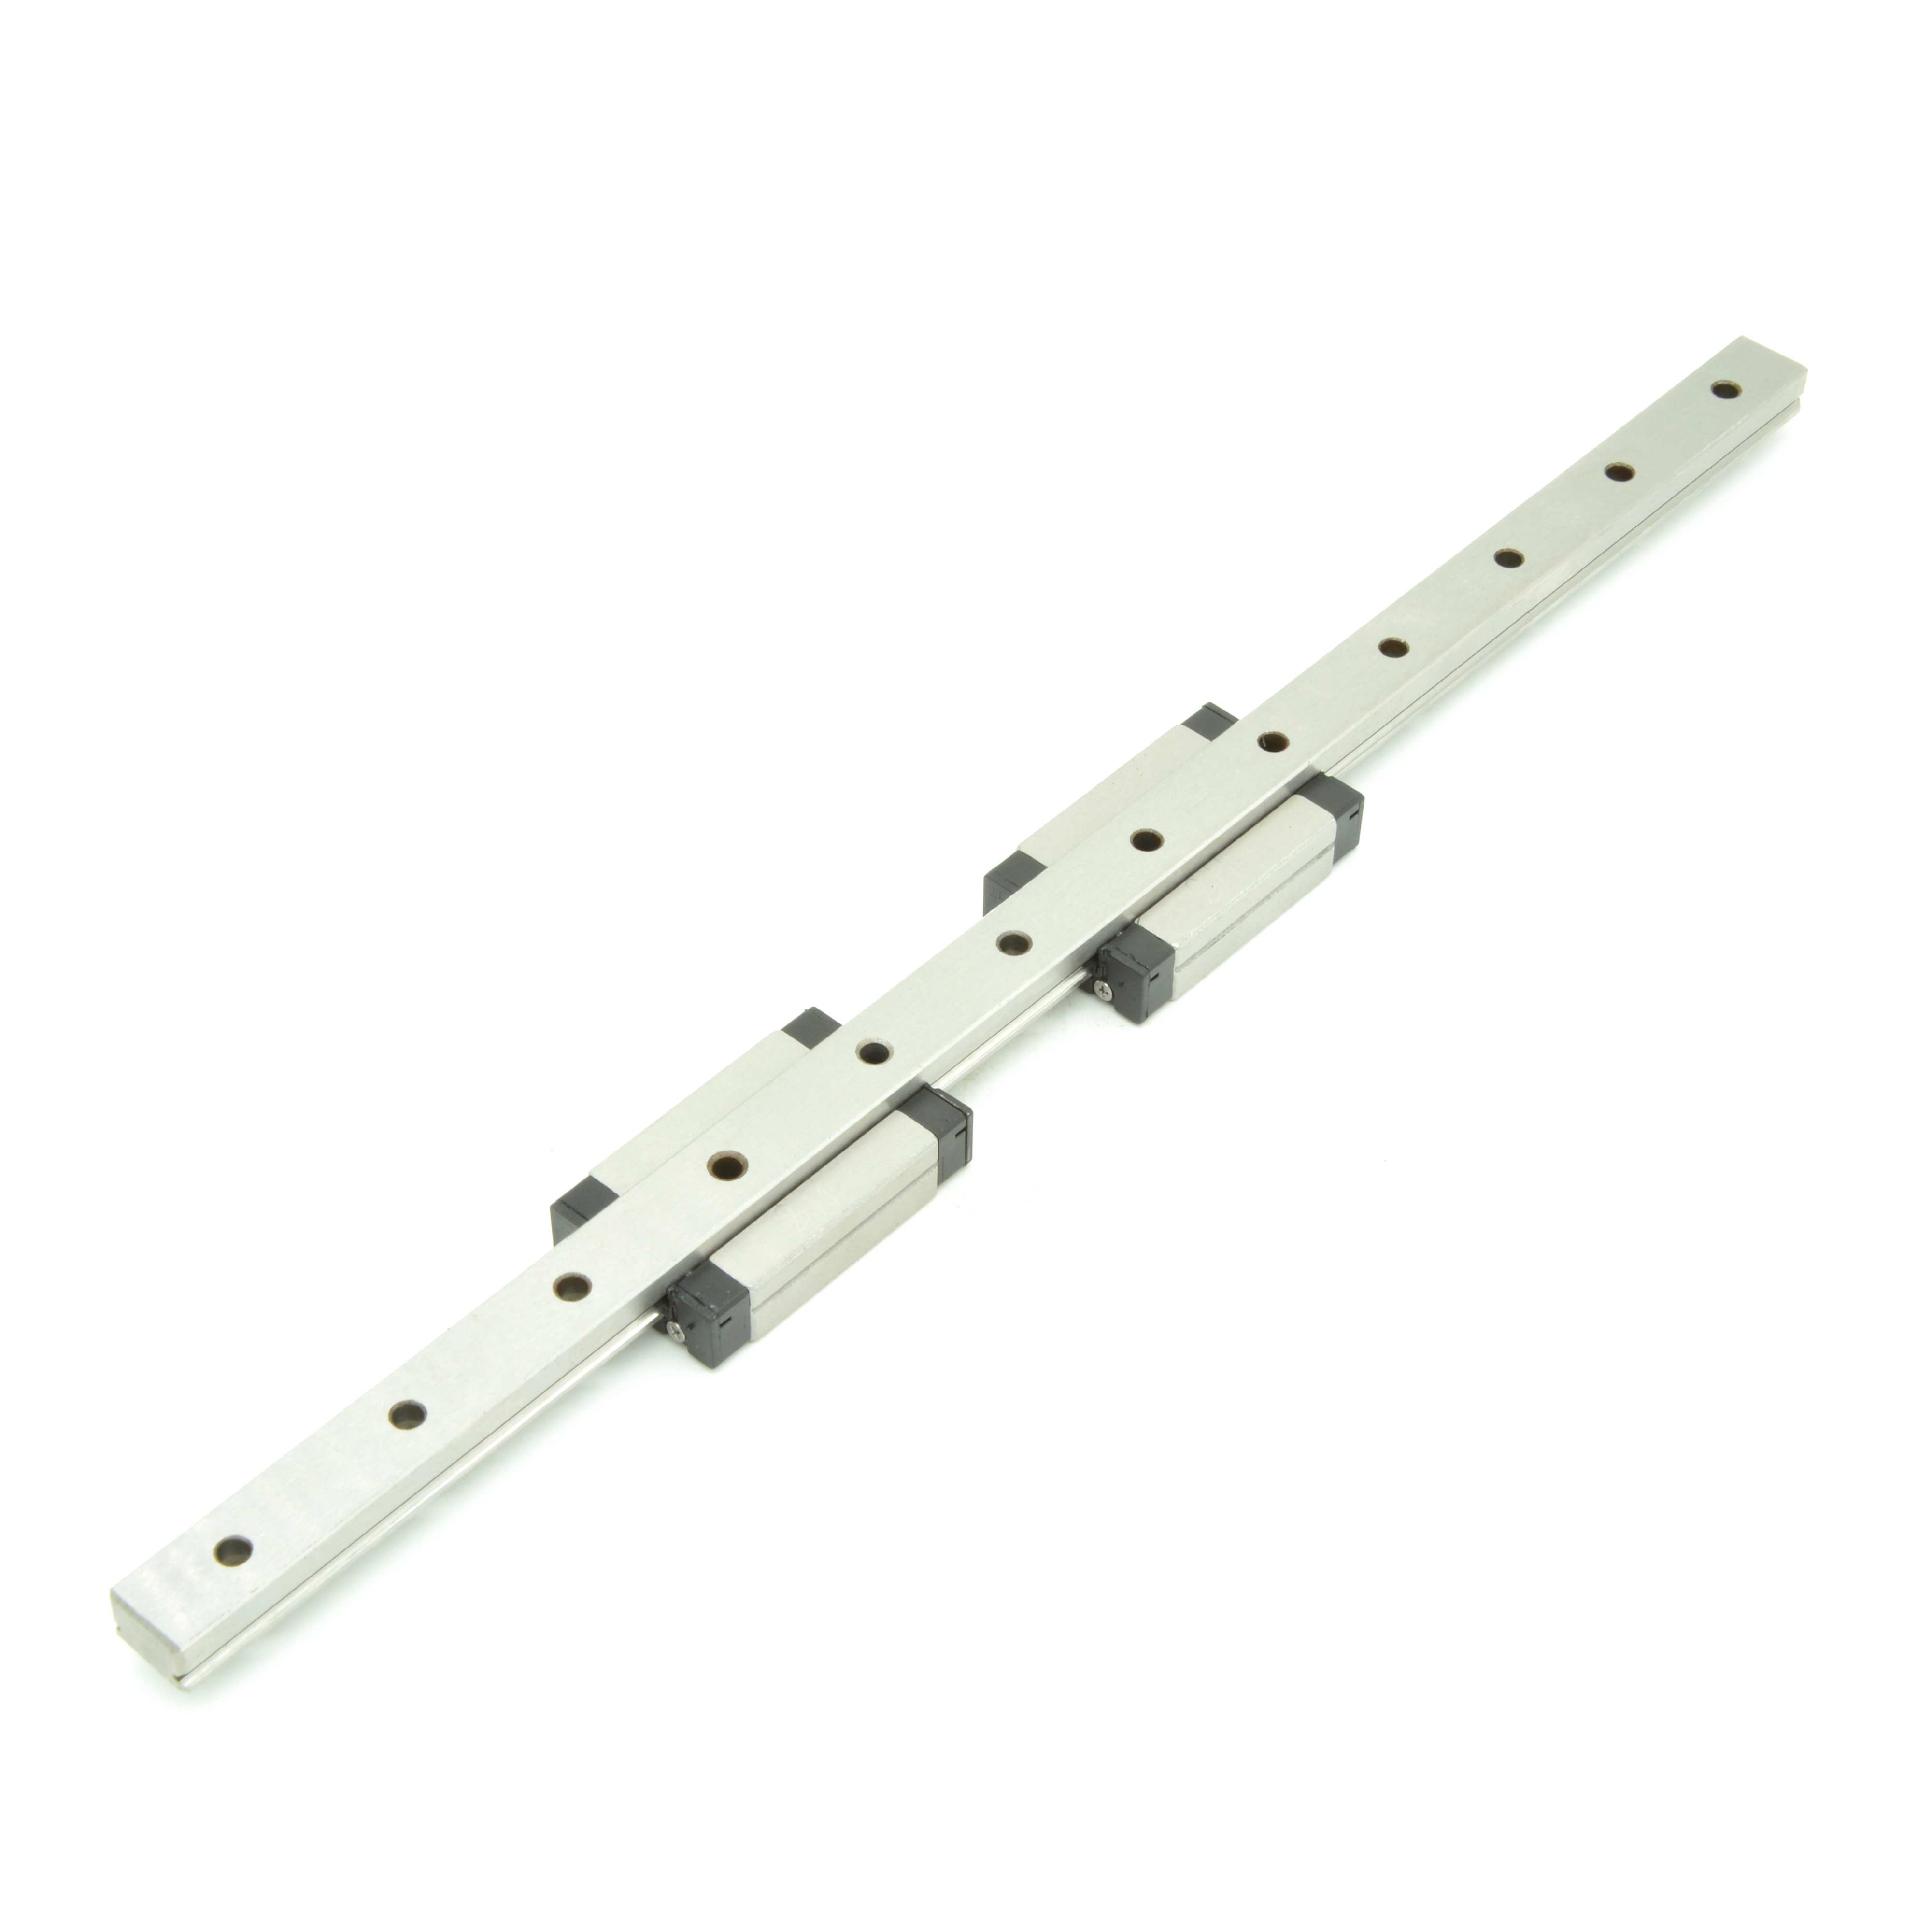 RobotDigg 440C SUS Stainless Steel MGN12 Linear Guide Rail Linear Guideway with C/H Carriages